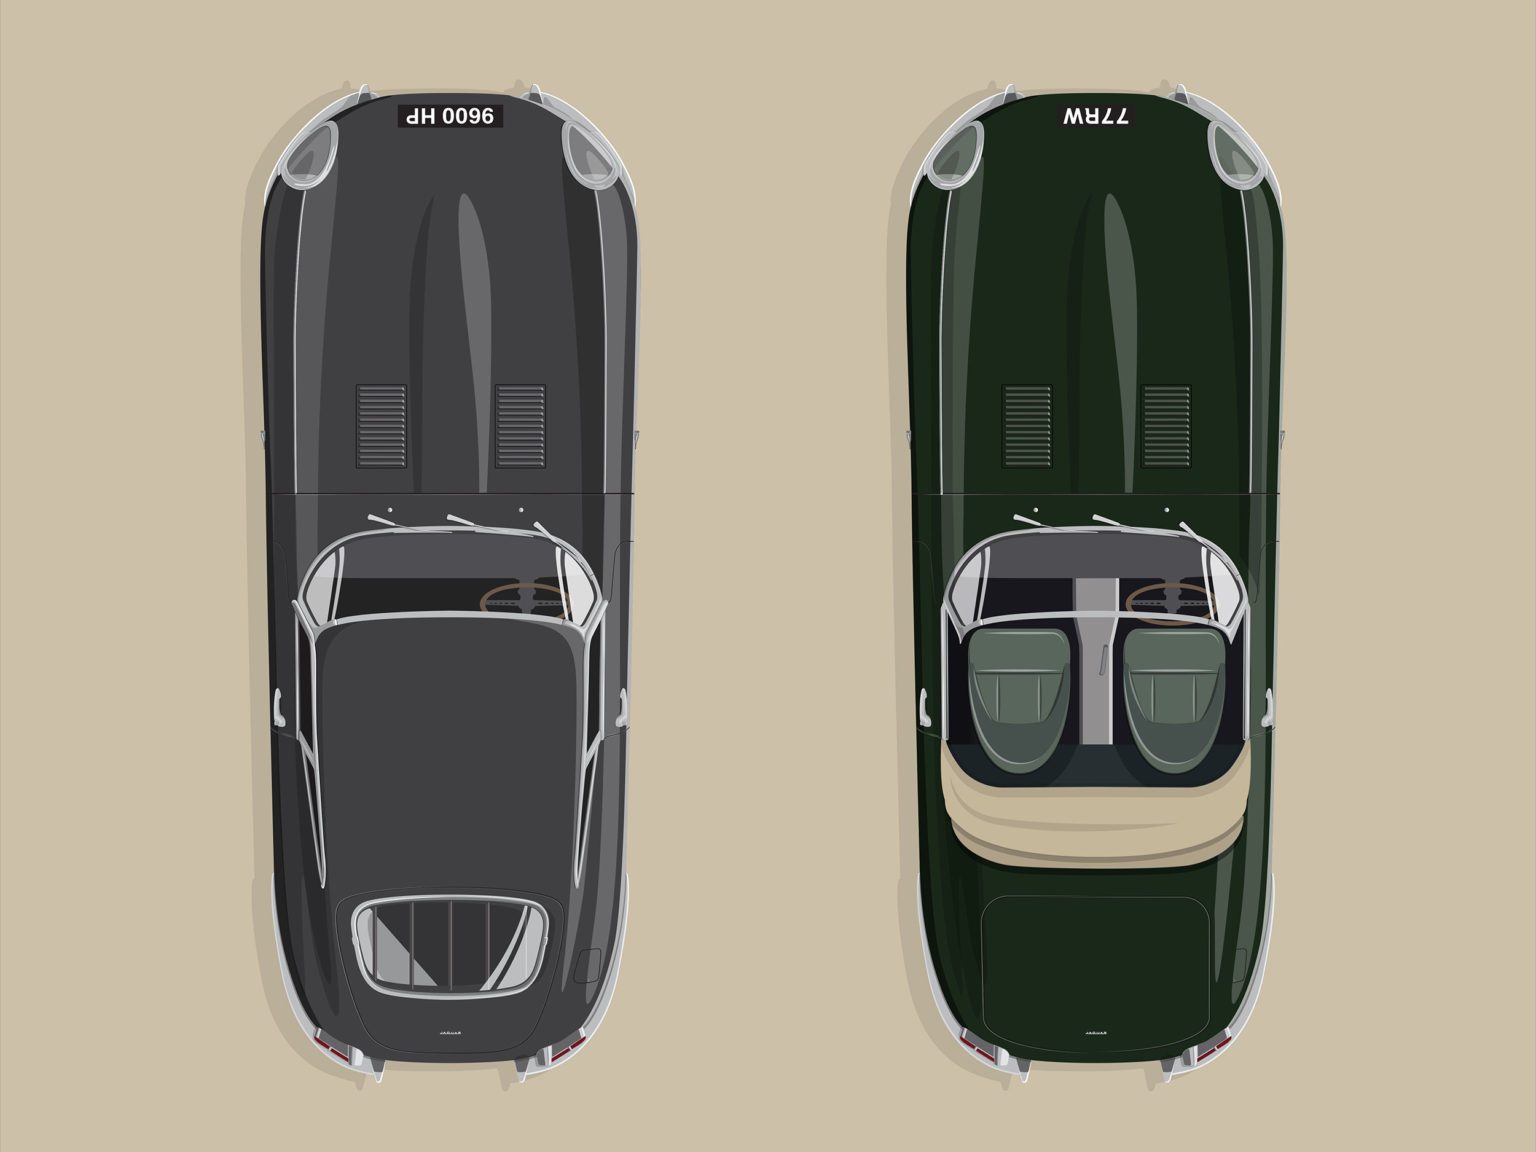 The Jaguar E-Type Collection celebrates the 60th anniversary of the E-Type’s debut